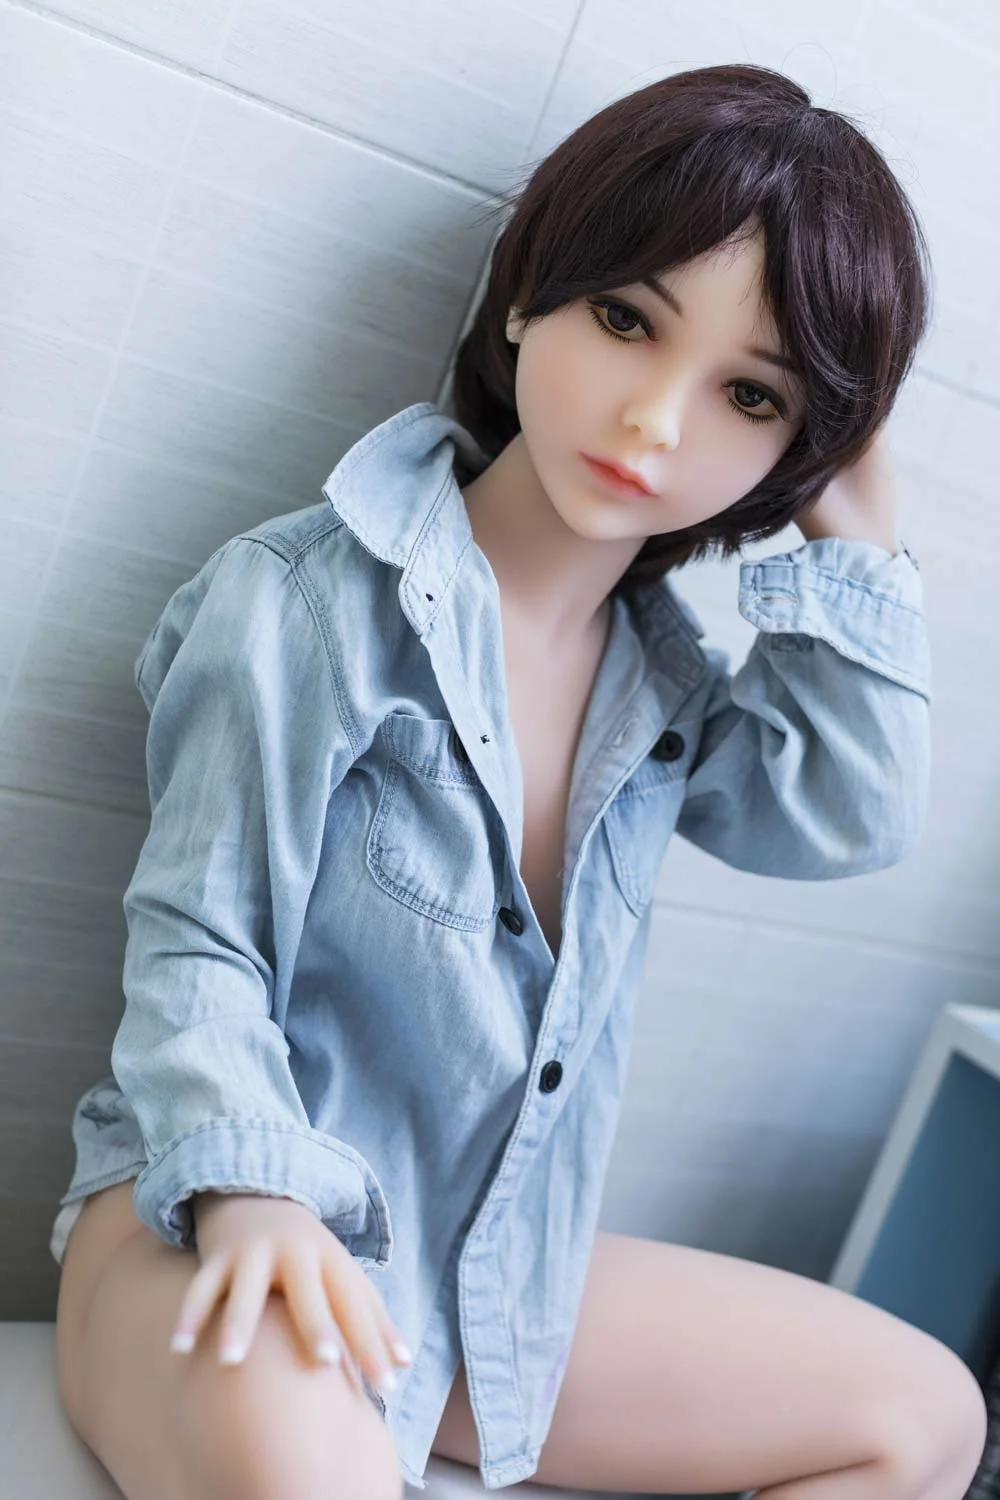 Mini sex doll with hand on thigh